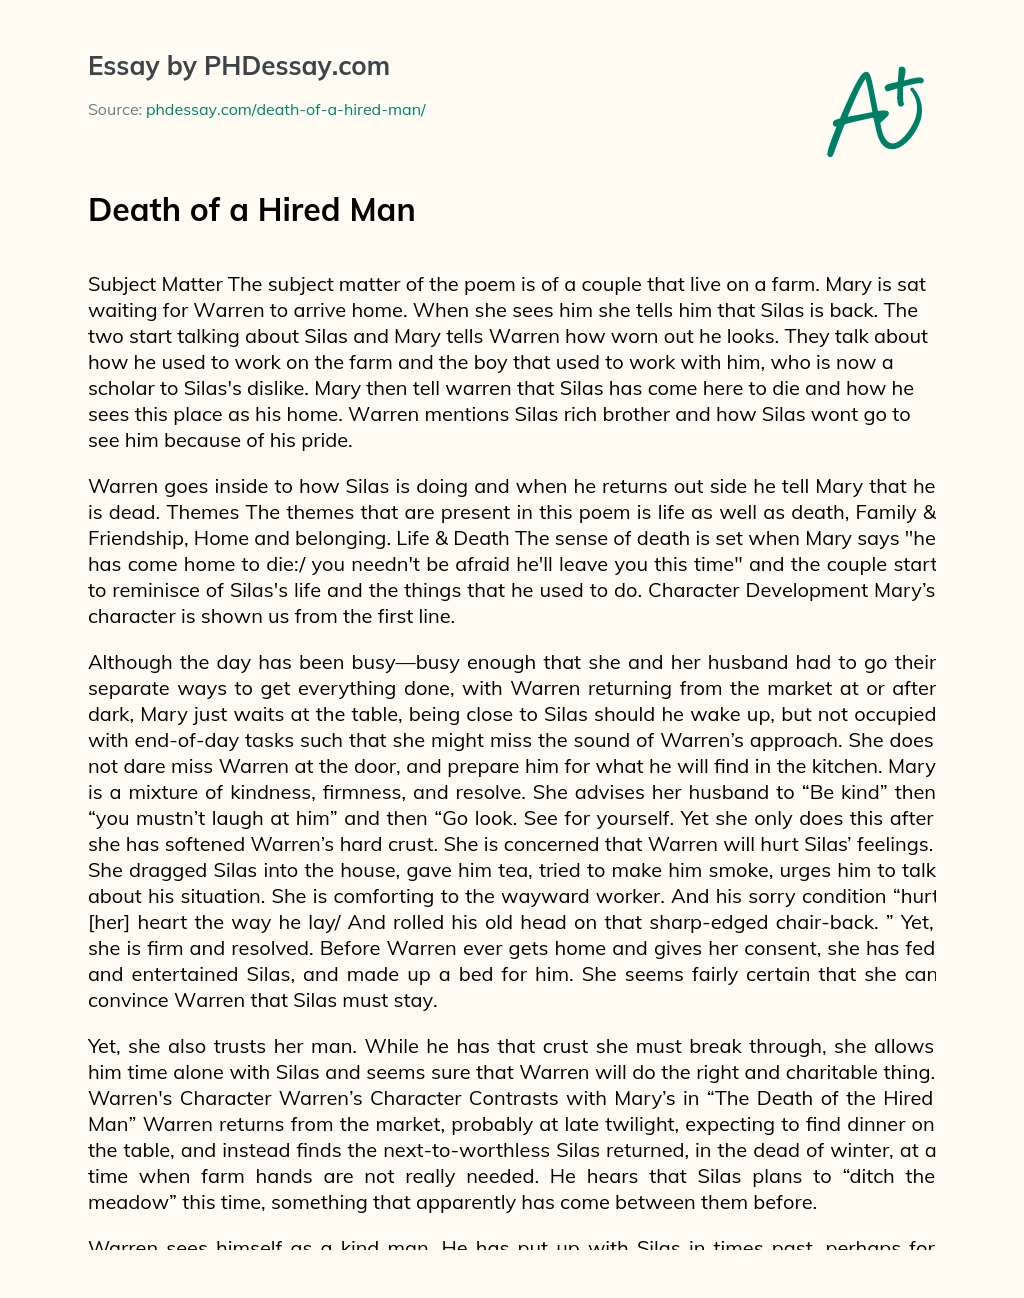 Death of a Hired Man essay